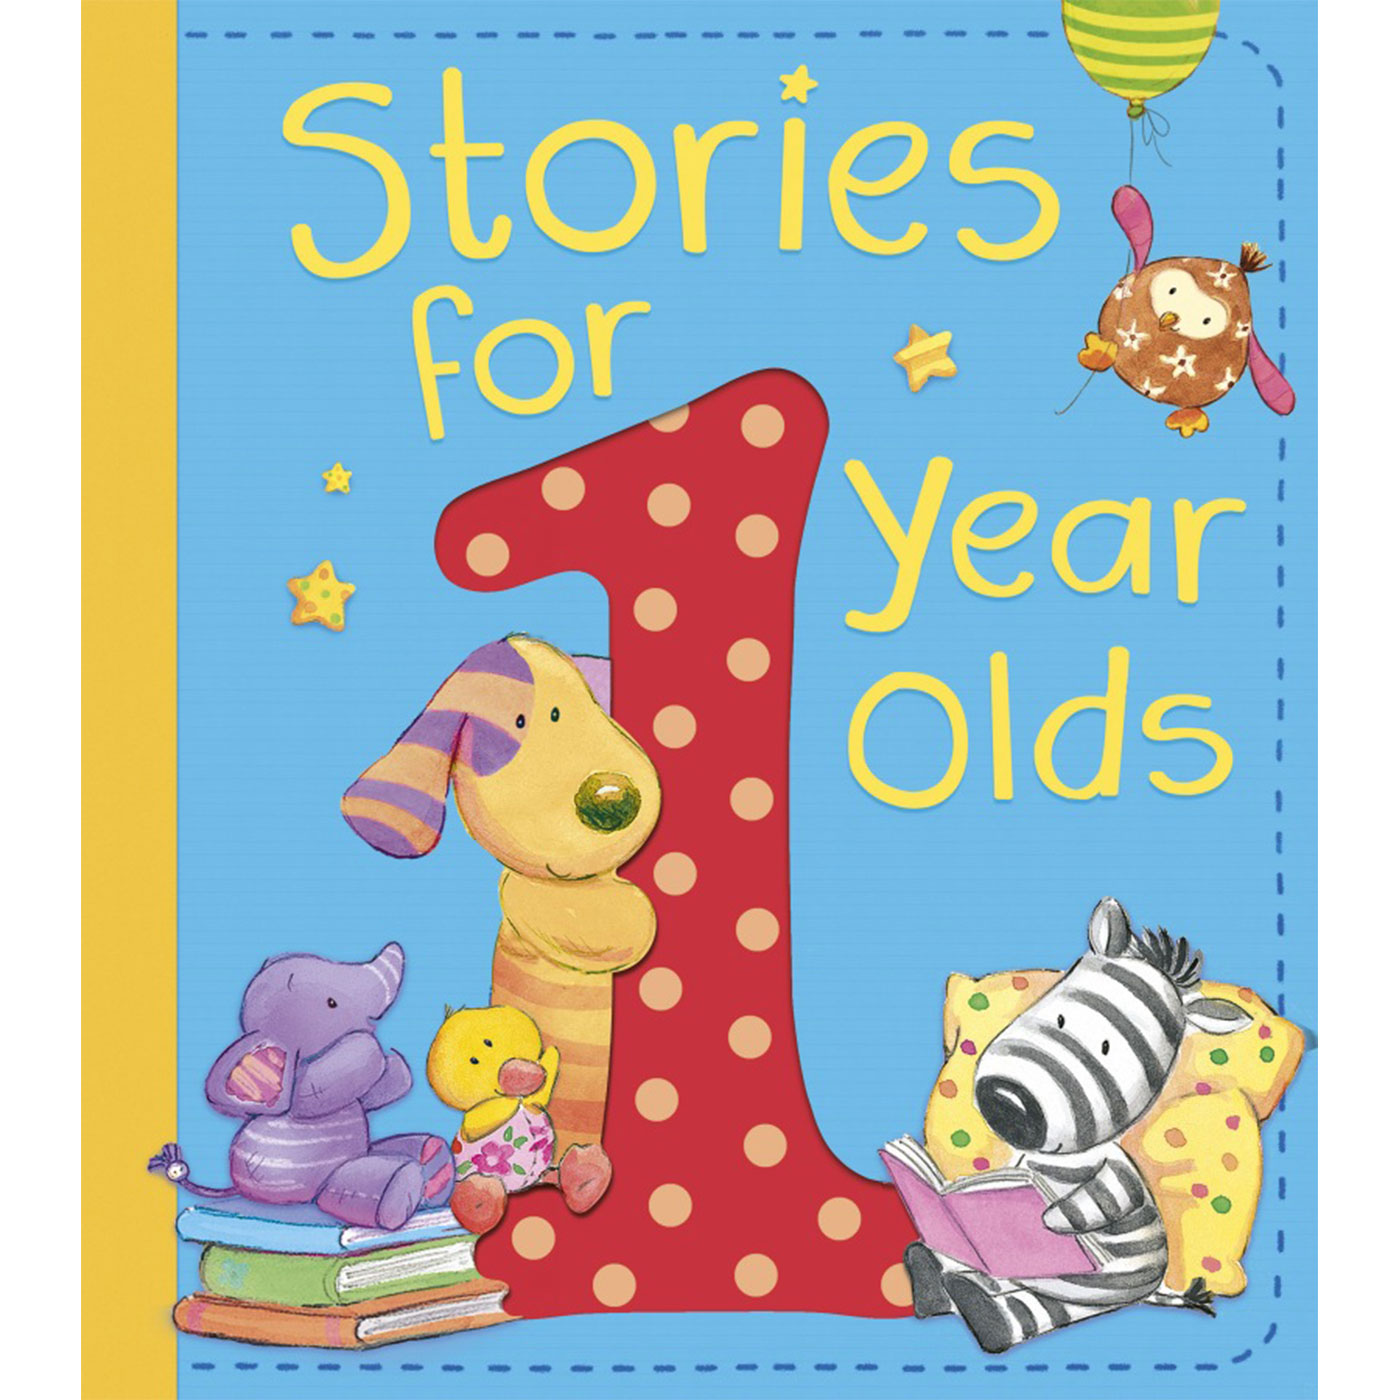 LITTLE TIGER Stories For 1 Year Olds